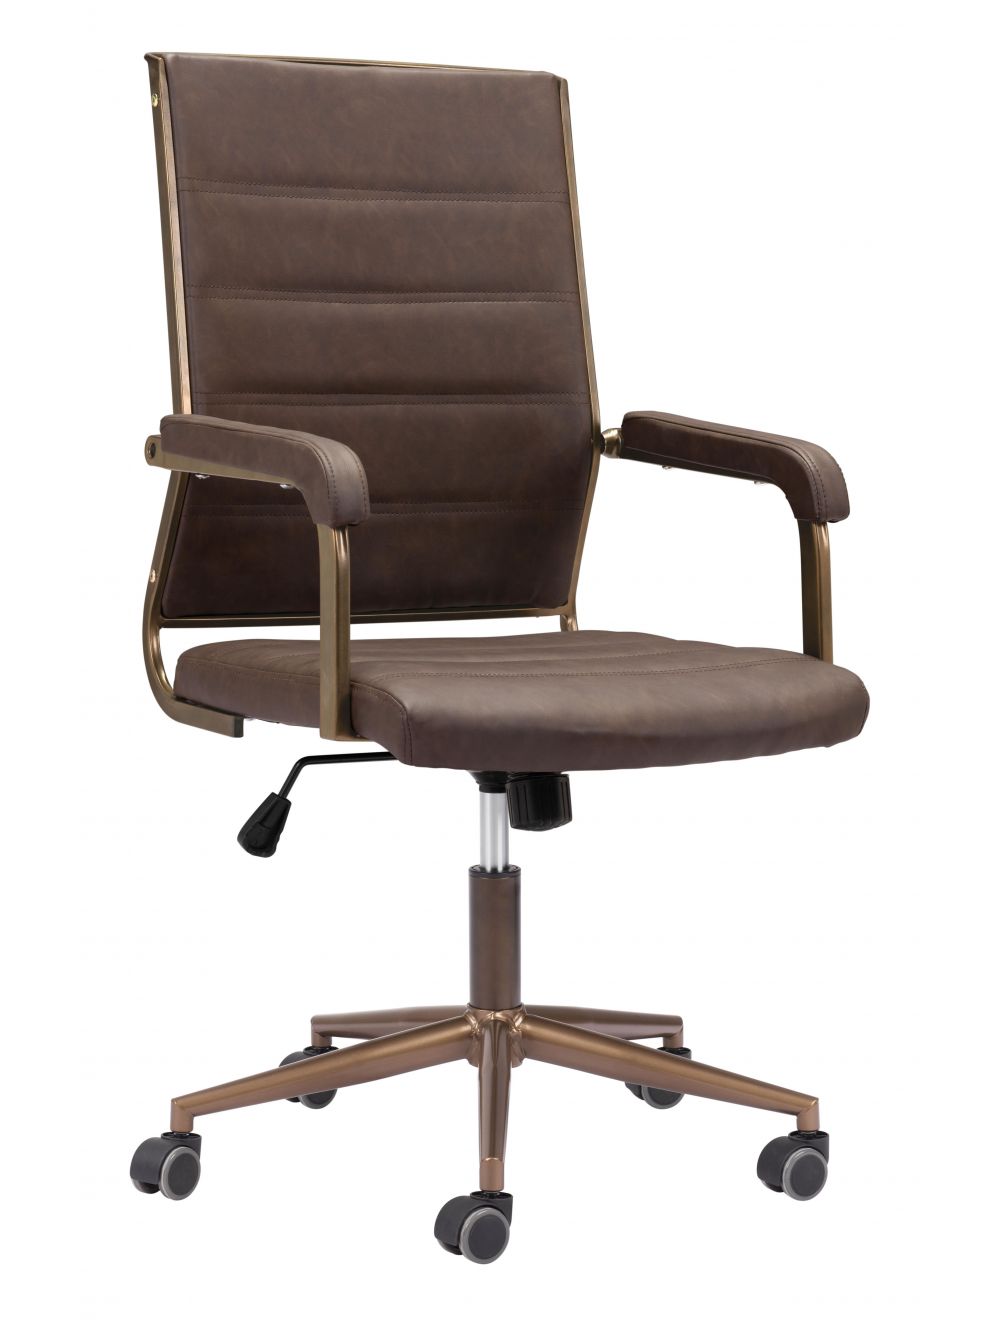 Auction Office Chair Vintage Brown